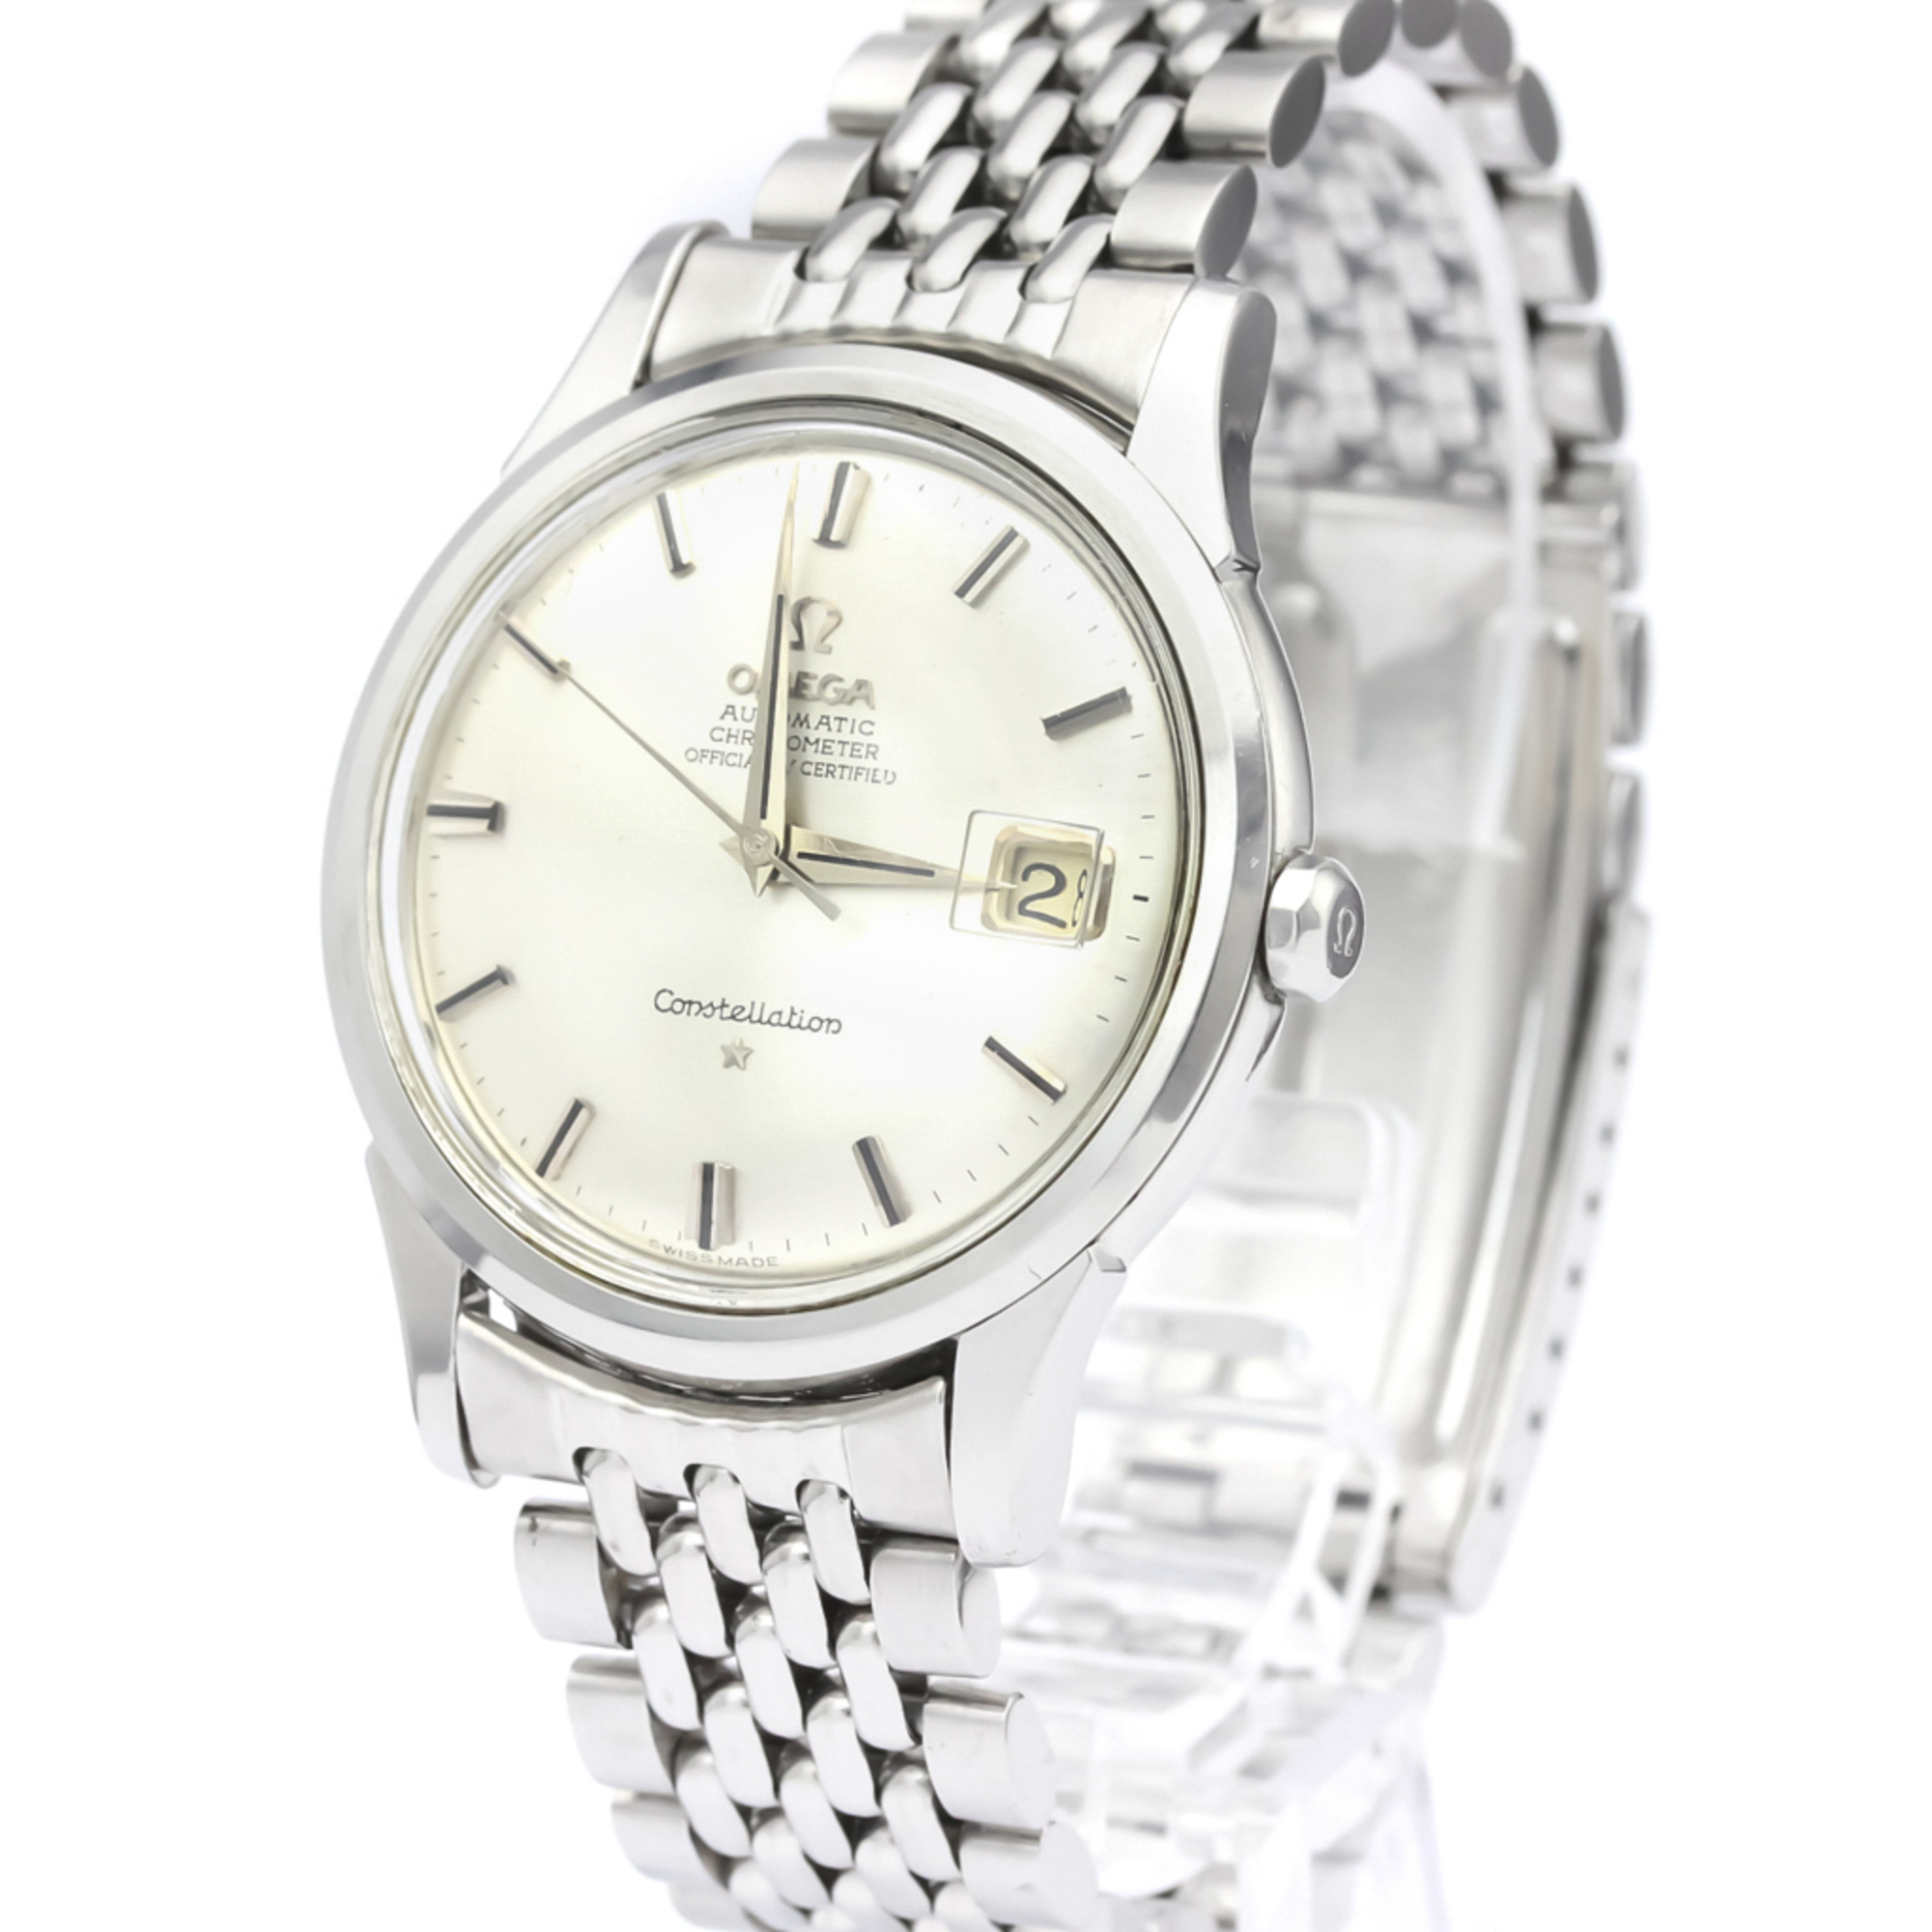 Omega Constellation Automatic Stainless Steel Men's Dress Watch 14777